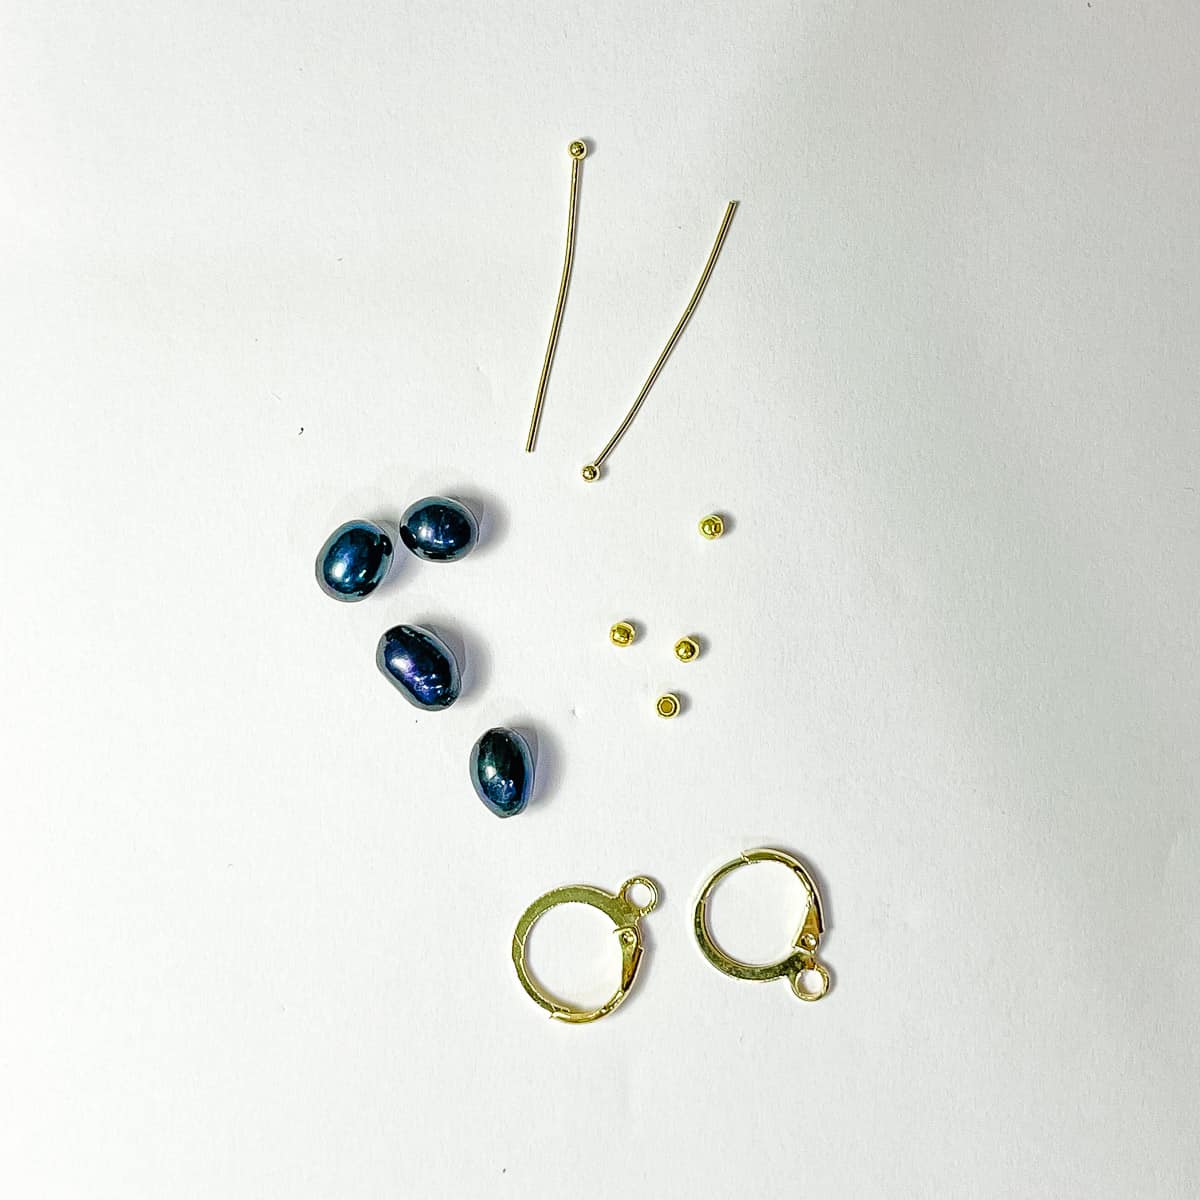 4 blue pearls, 2 headpins, 4 gold filler beads and 2 gold lever back earring hoops.